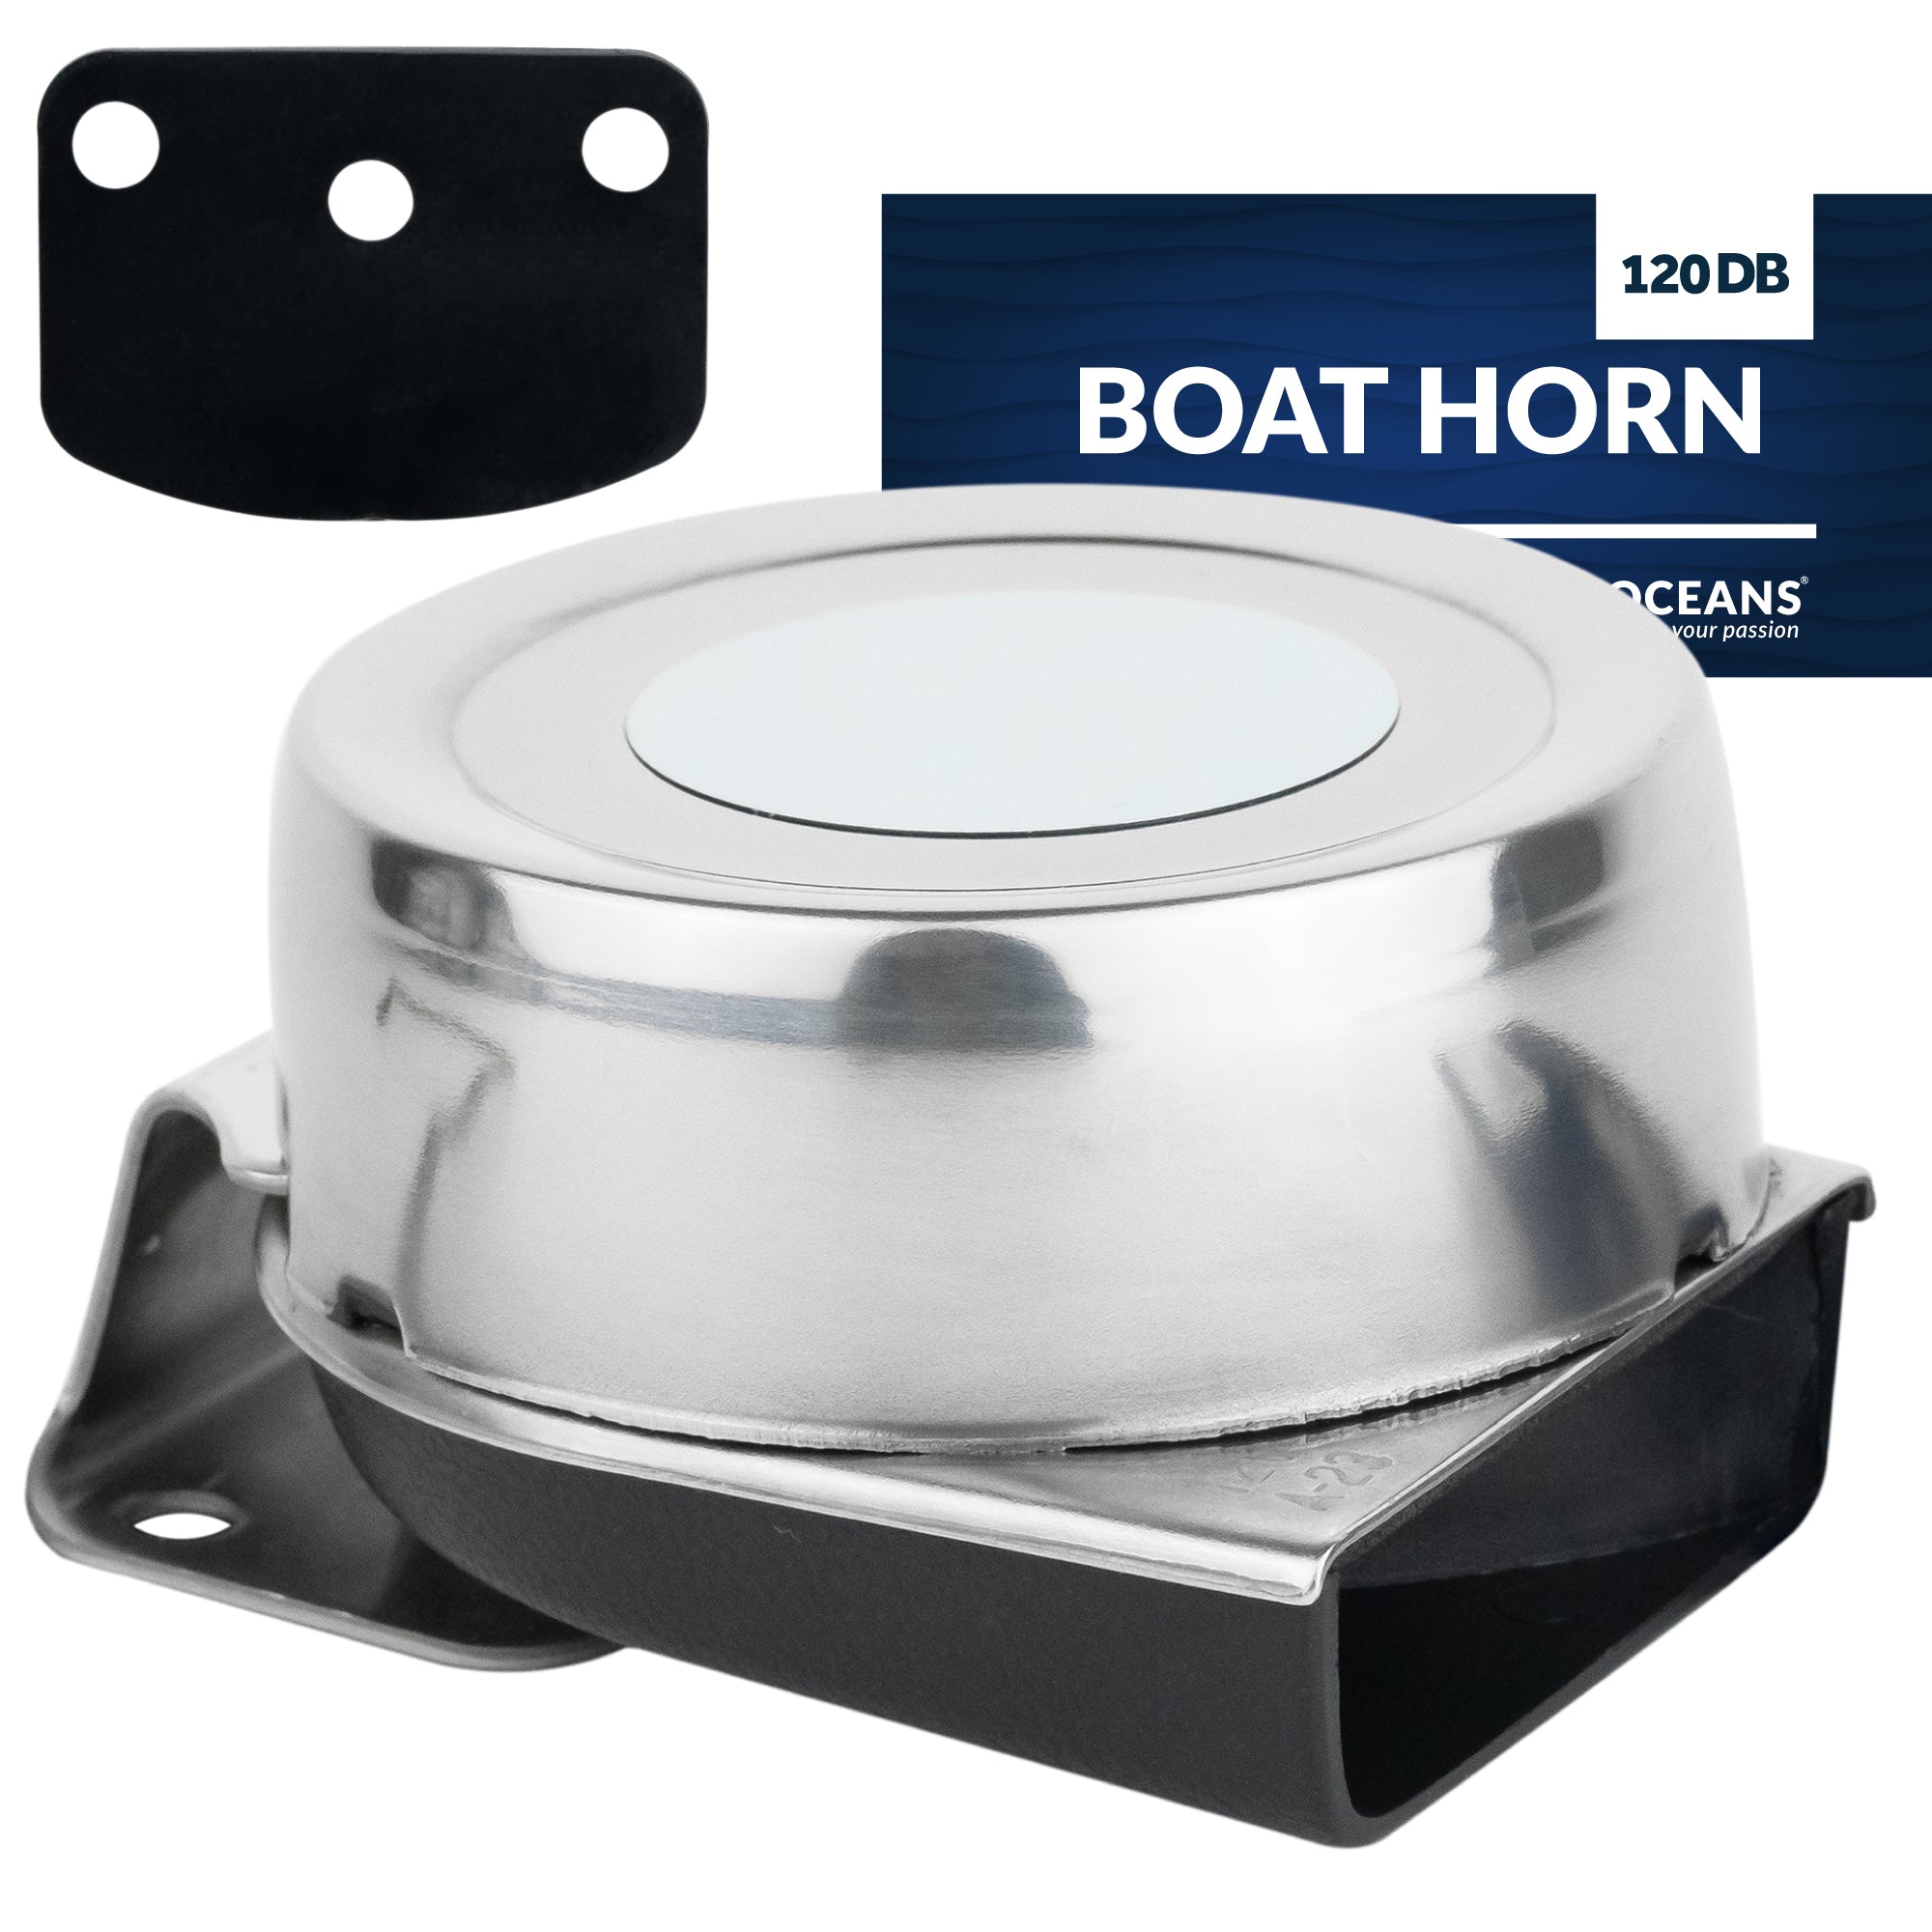 Boat Horn, 120 dB, Stainless Steel Cover, 12V - FO600